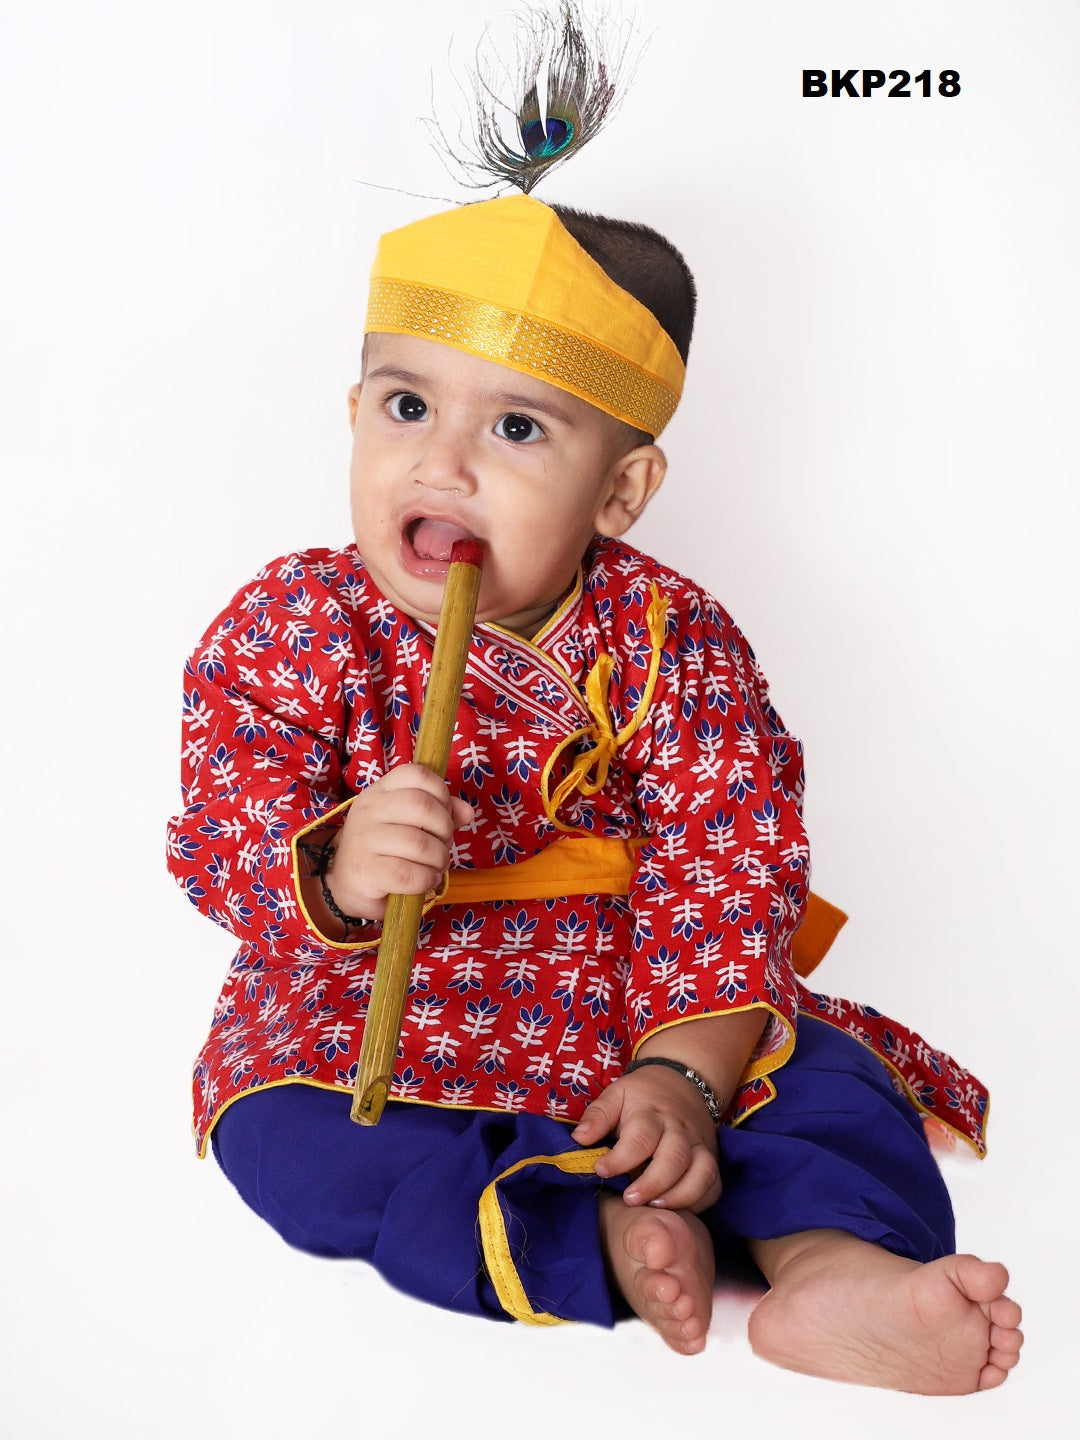 BKP218 - Red and Ble angrakha style krishna costume set with accessories